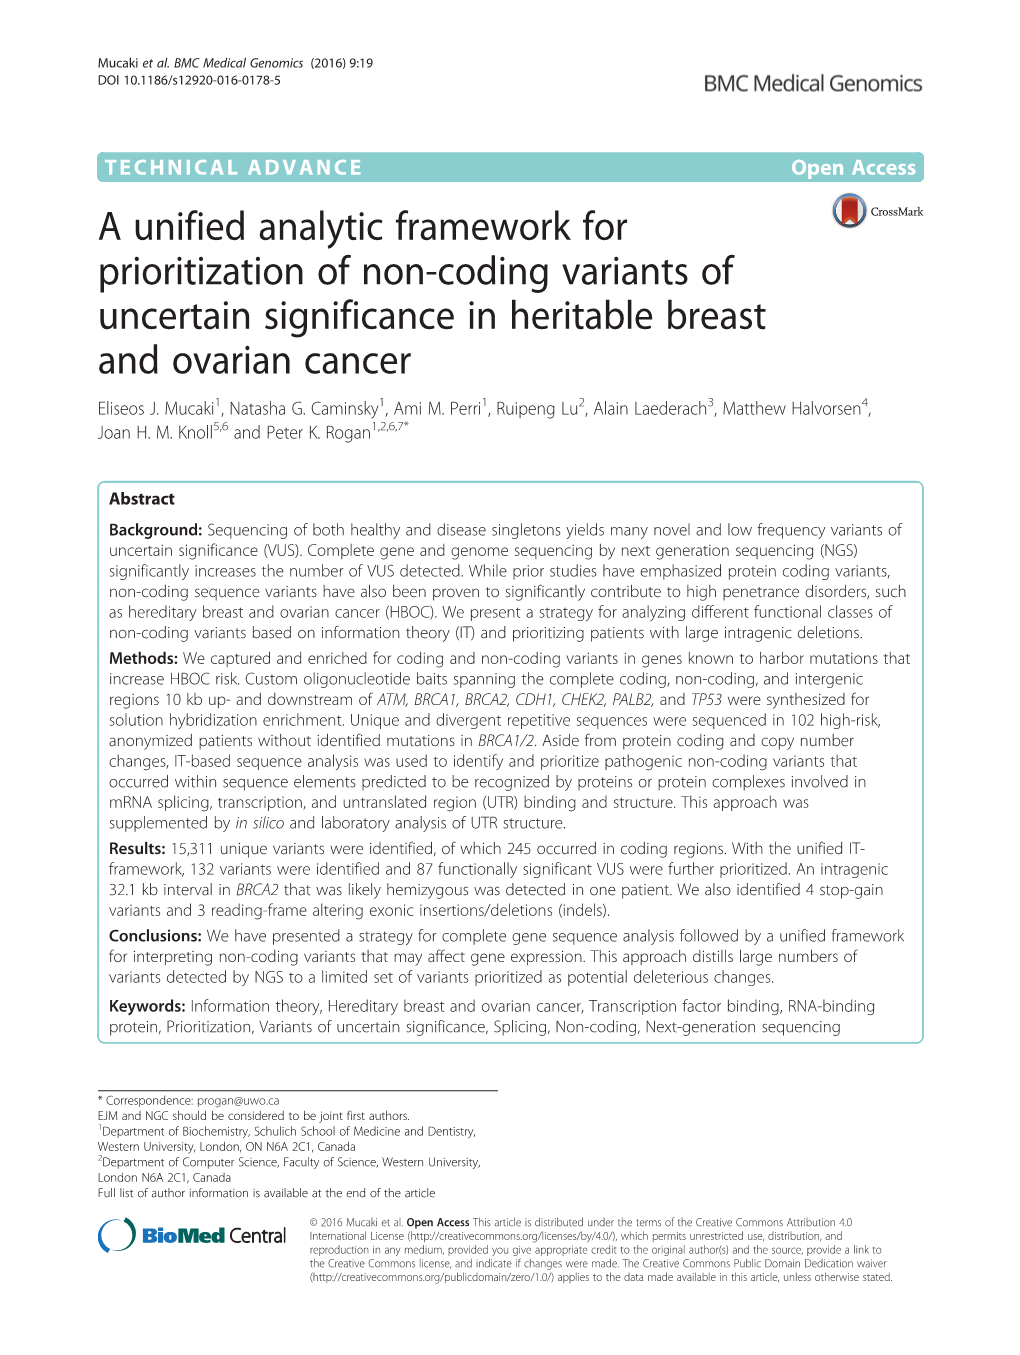 A Unified Analytic Framework for Prioritization of Non-Coding Variants of Uncertain Significance in Heritable Breast and Ovarian Cancer Eliseos J